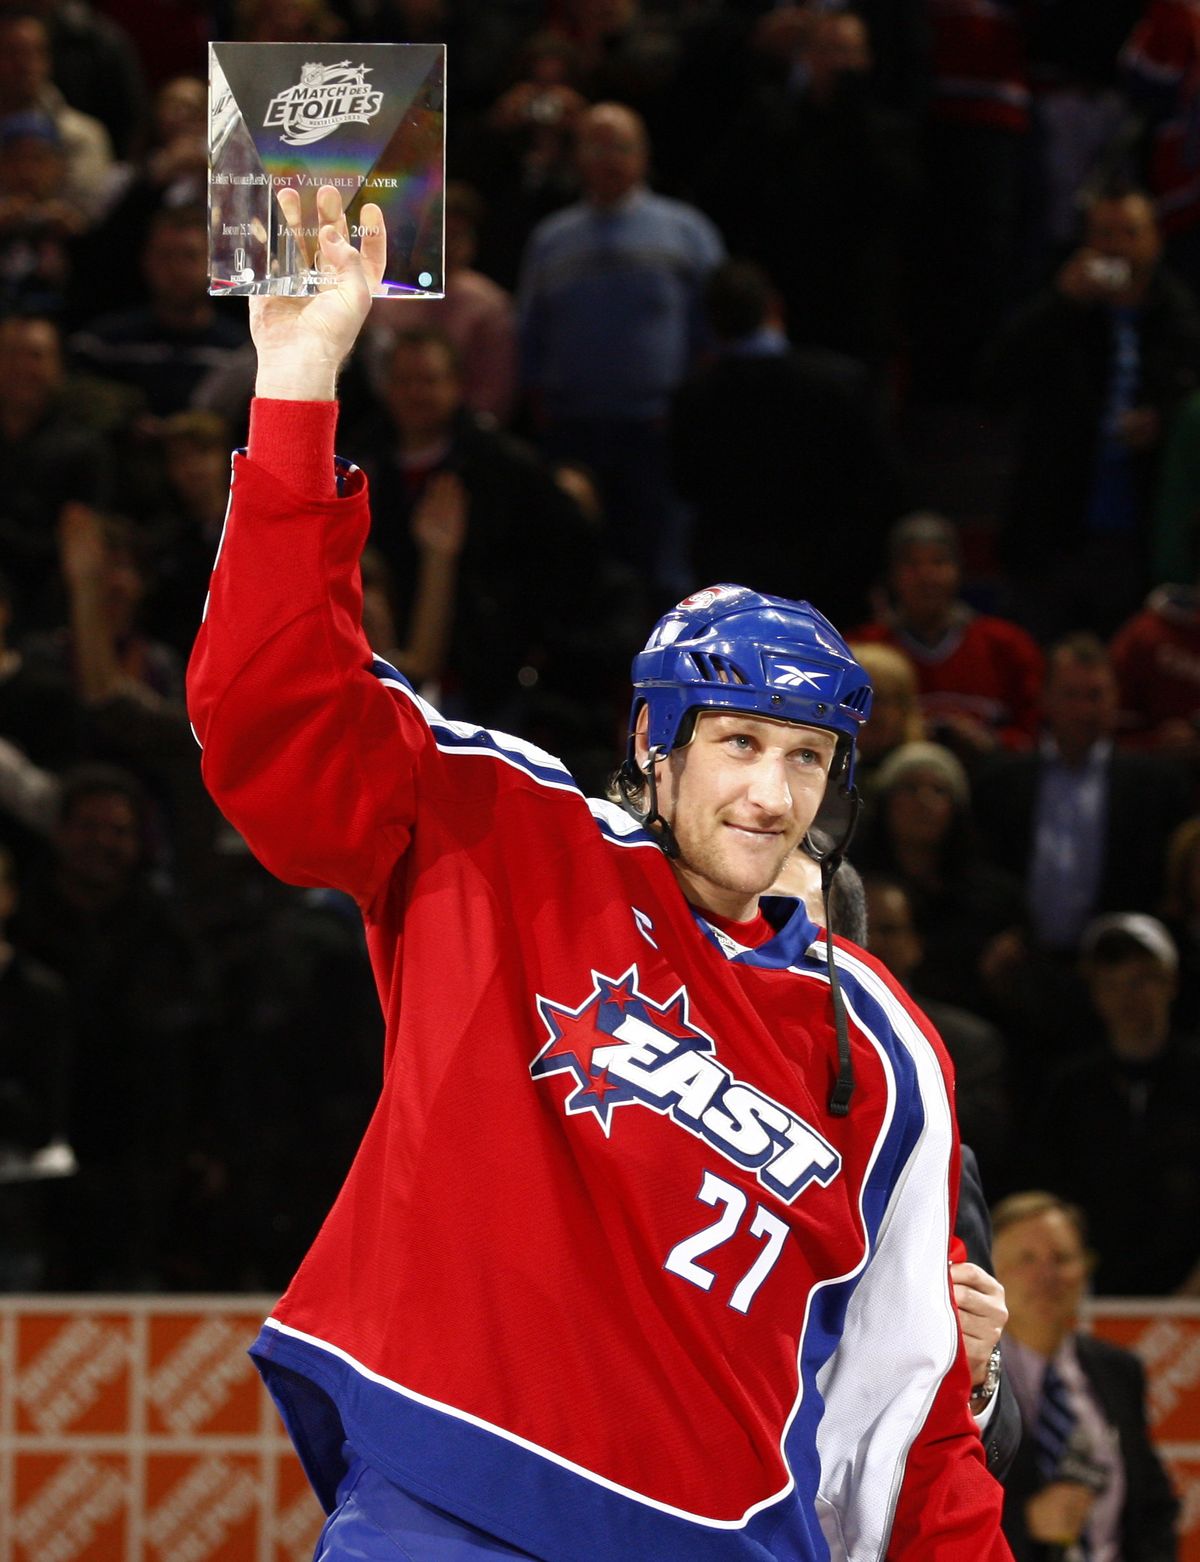 Montreal’s Alexei Kovalev holds up his MVP trophy. (Associated Press / The Spokesman-Review)